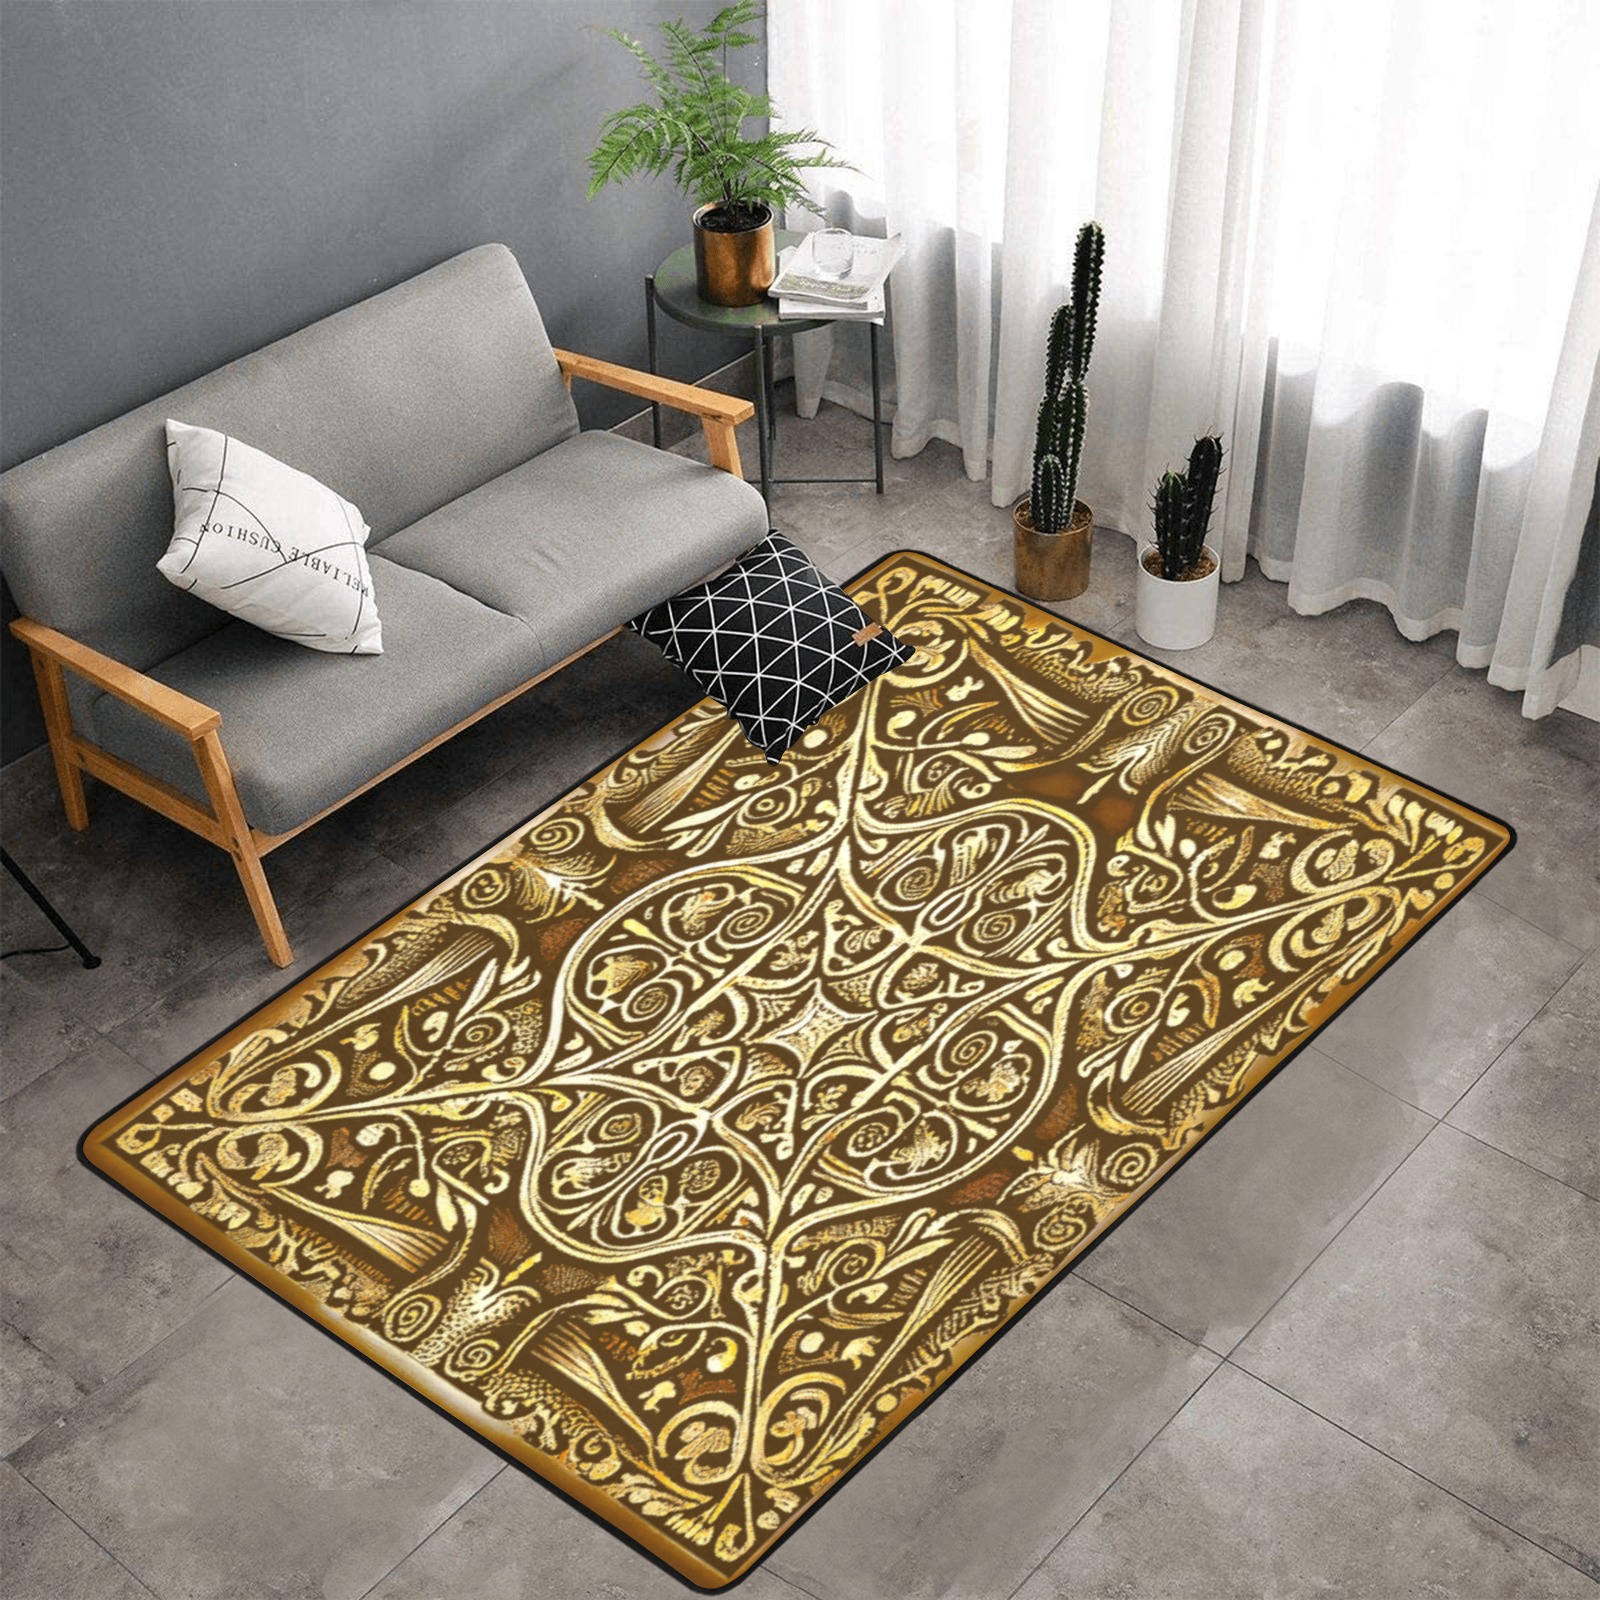 damask pattern, gold and brown Area Rug with Black Binding 7'x5'